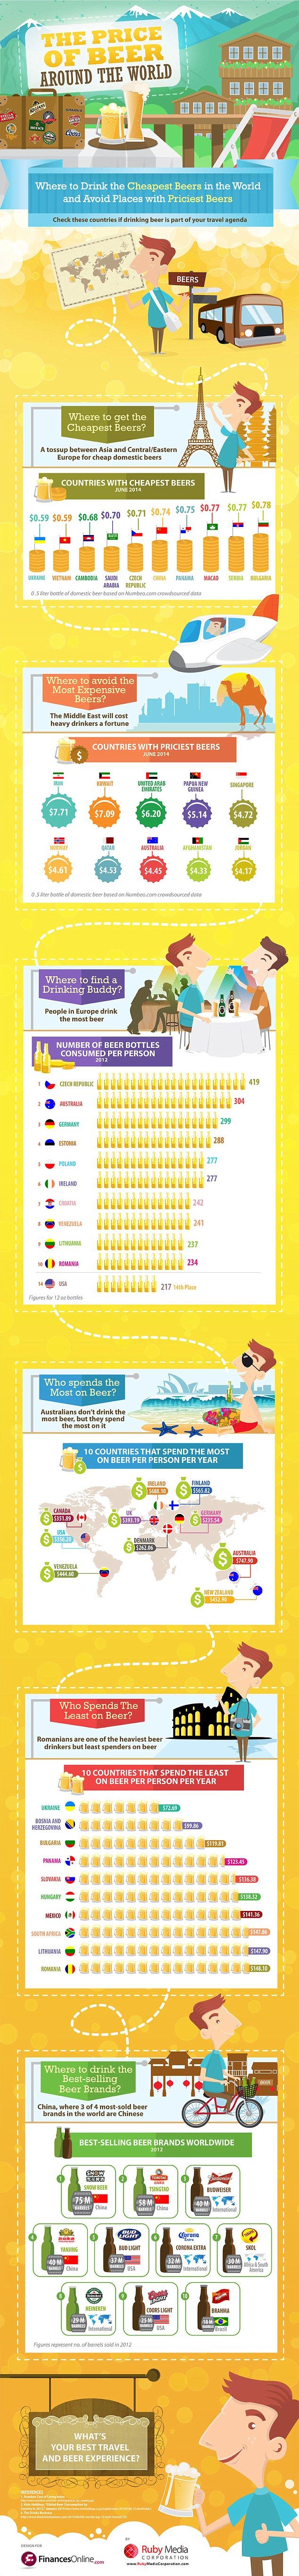 Food infographic - Infographic - Beer Around the World: Where to drink ...